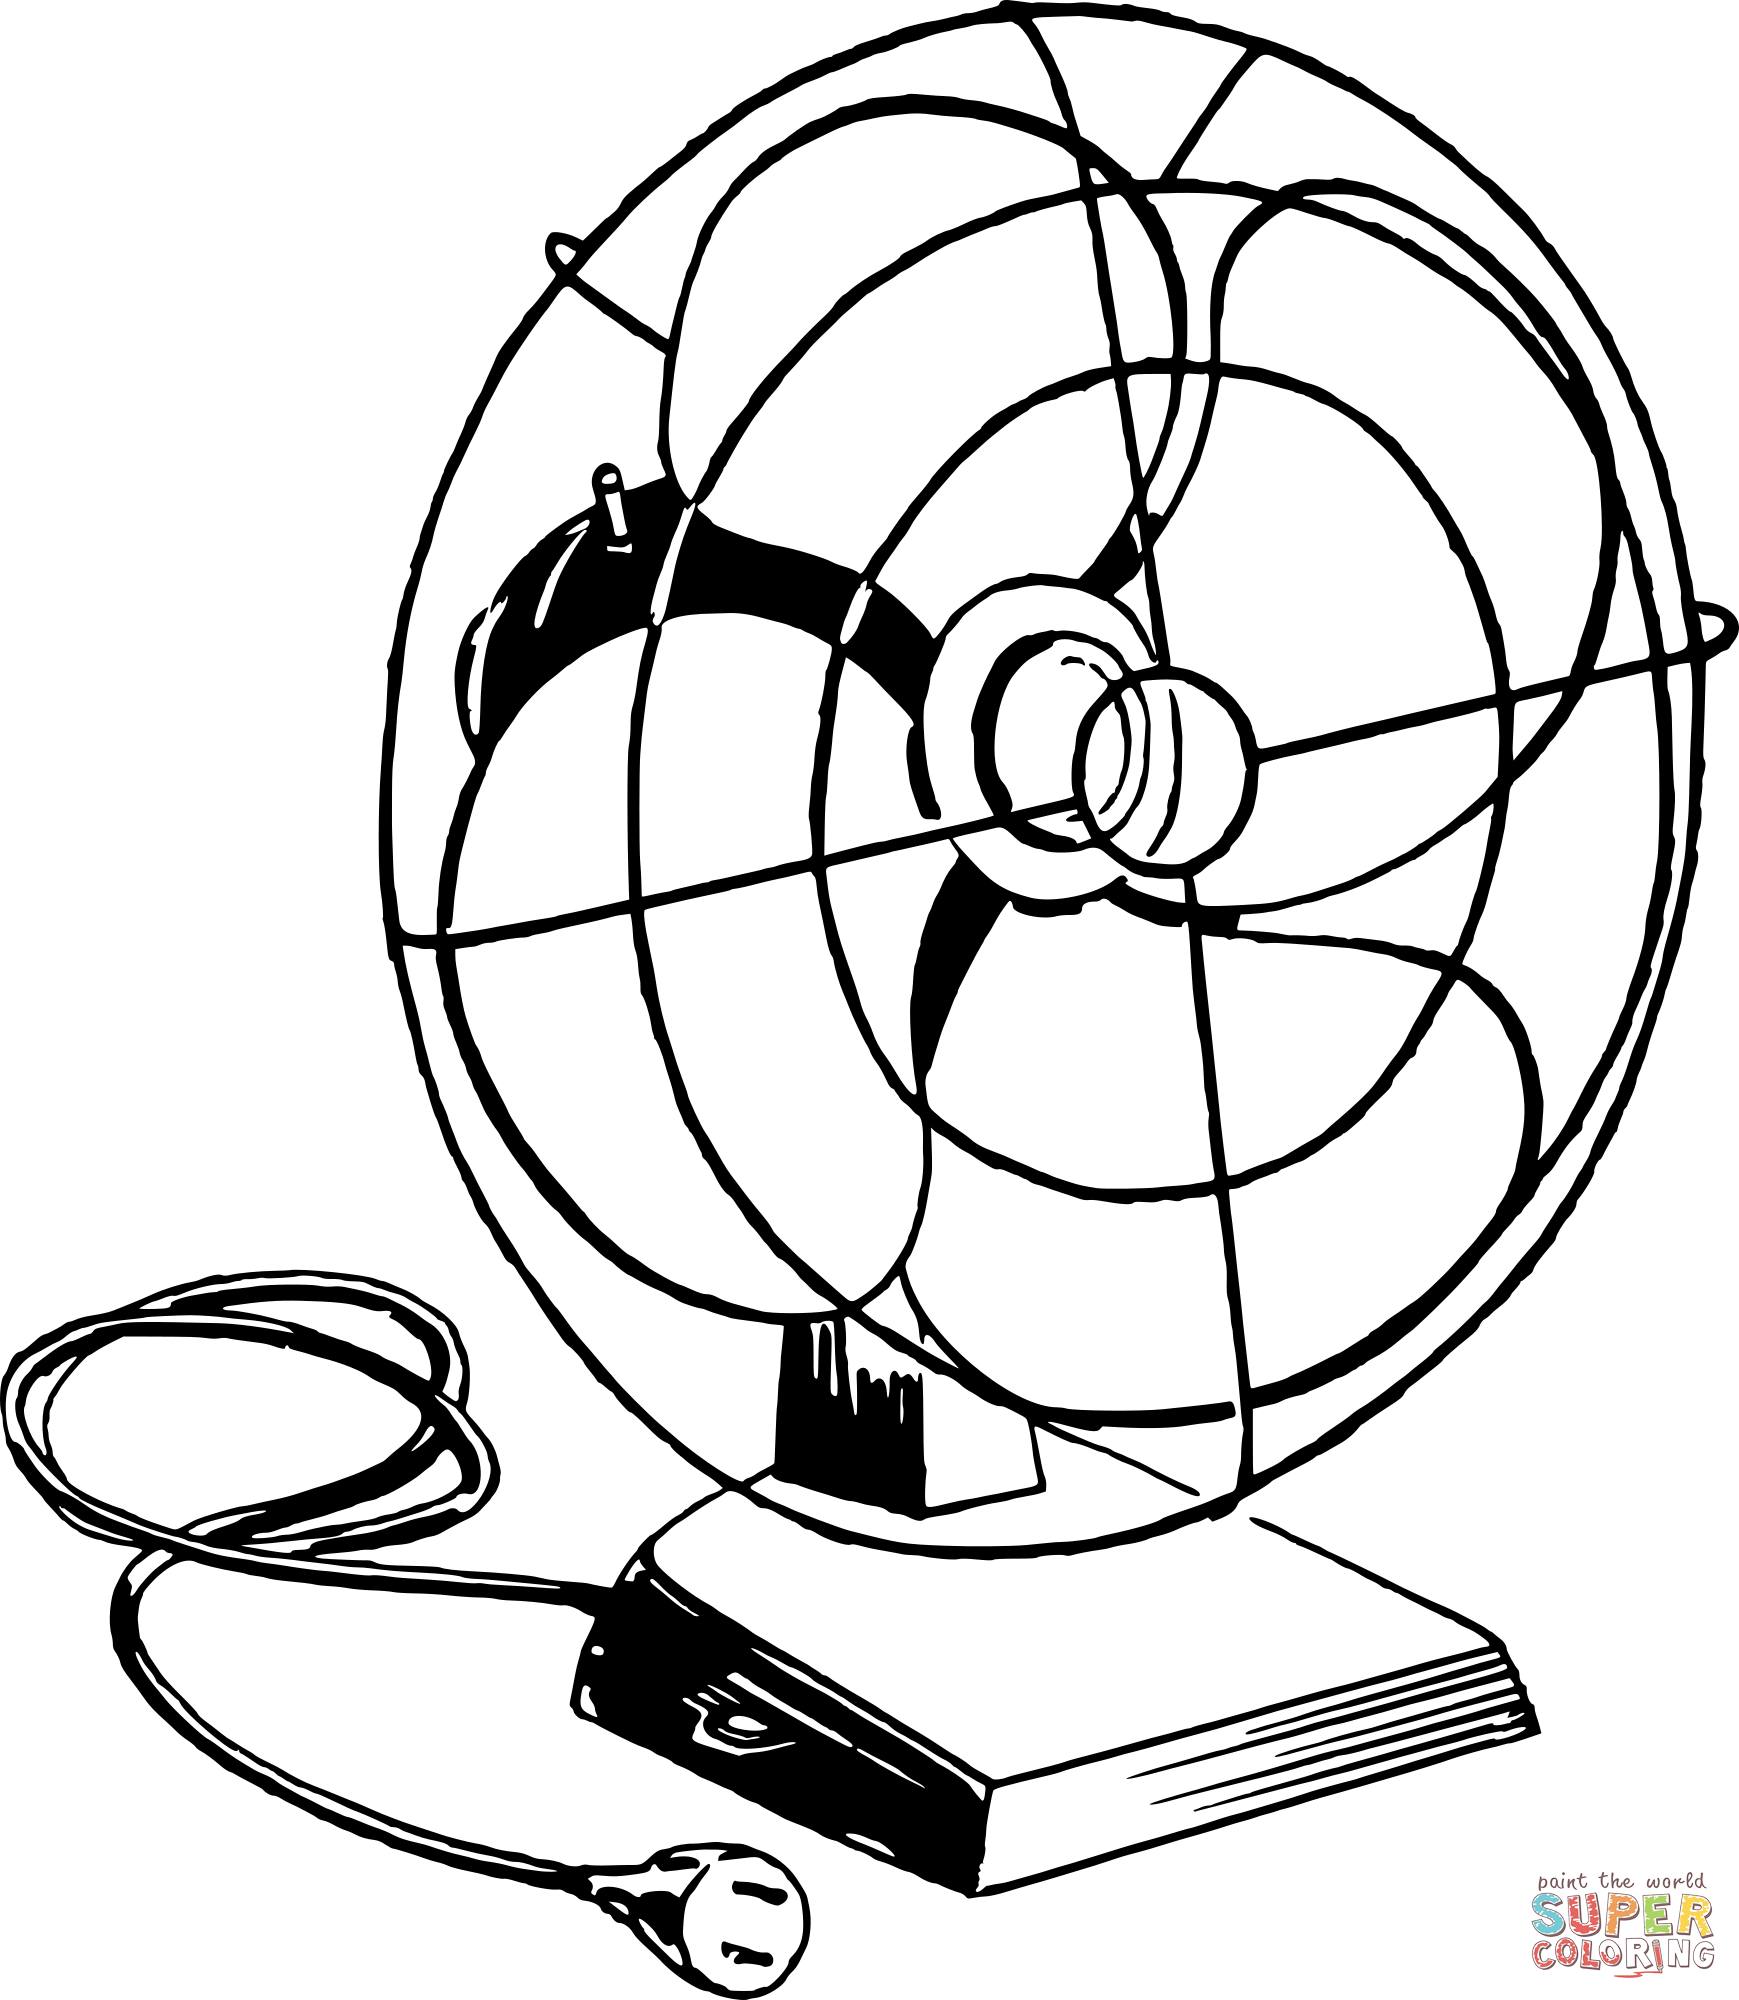 Vintage electric fan coloring page free printable coloring pages